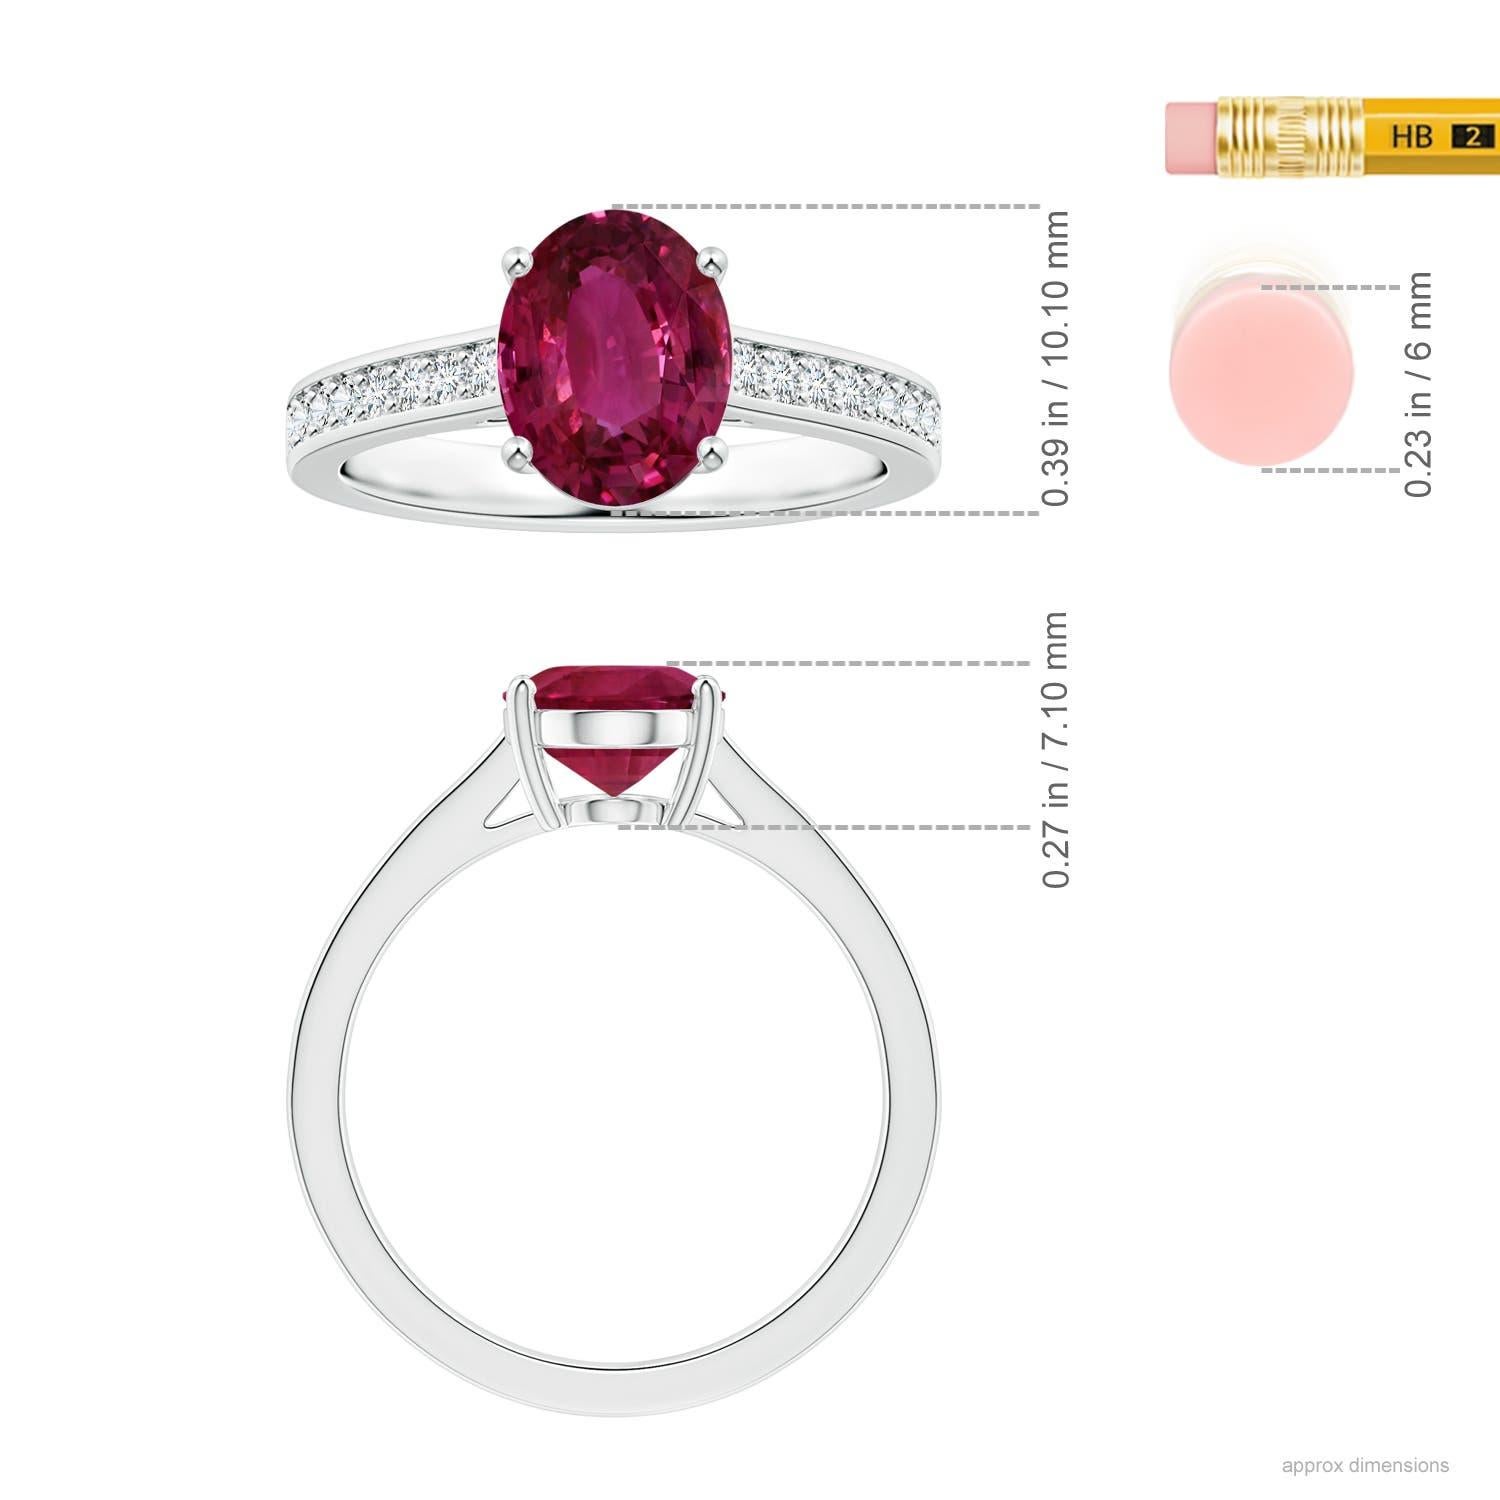 For Sale:  ANGARA Prong-Set GIA Certified Pink Sapphire Ring in White Gold with Diamonds 5